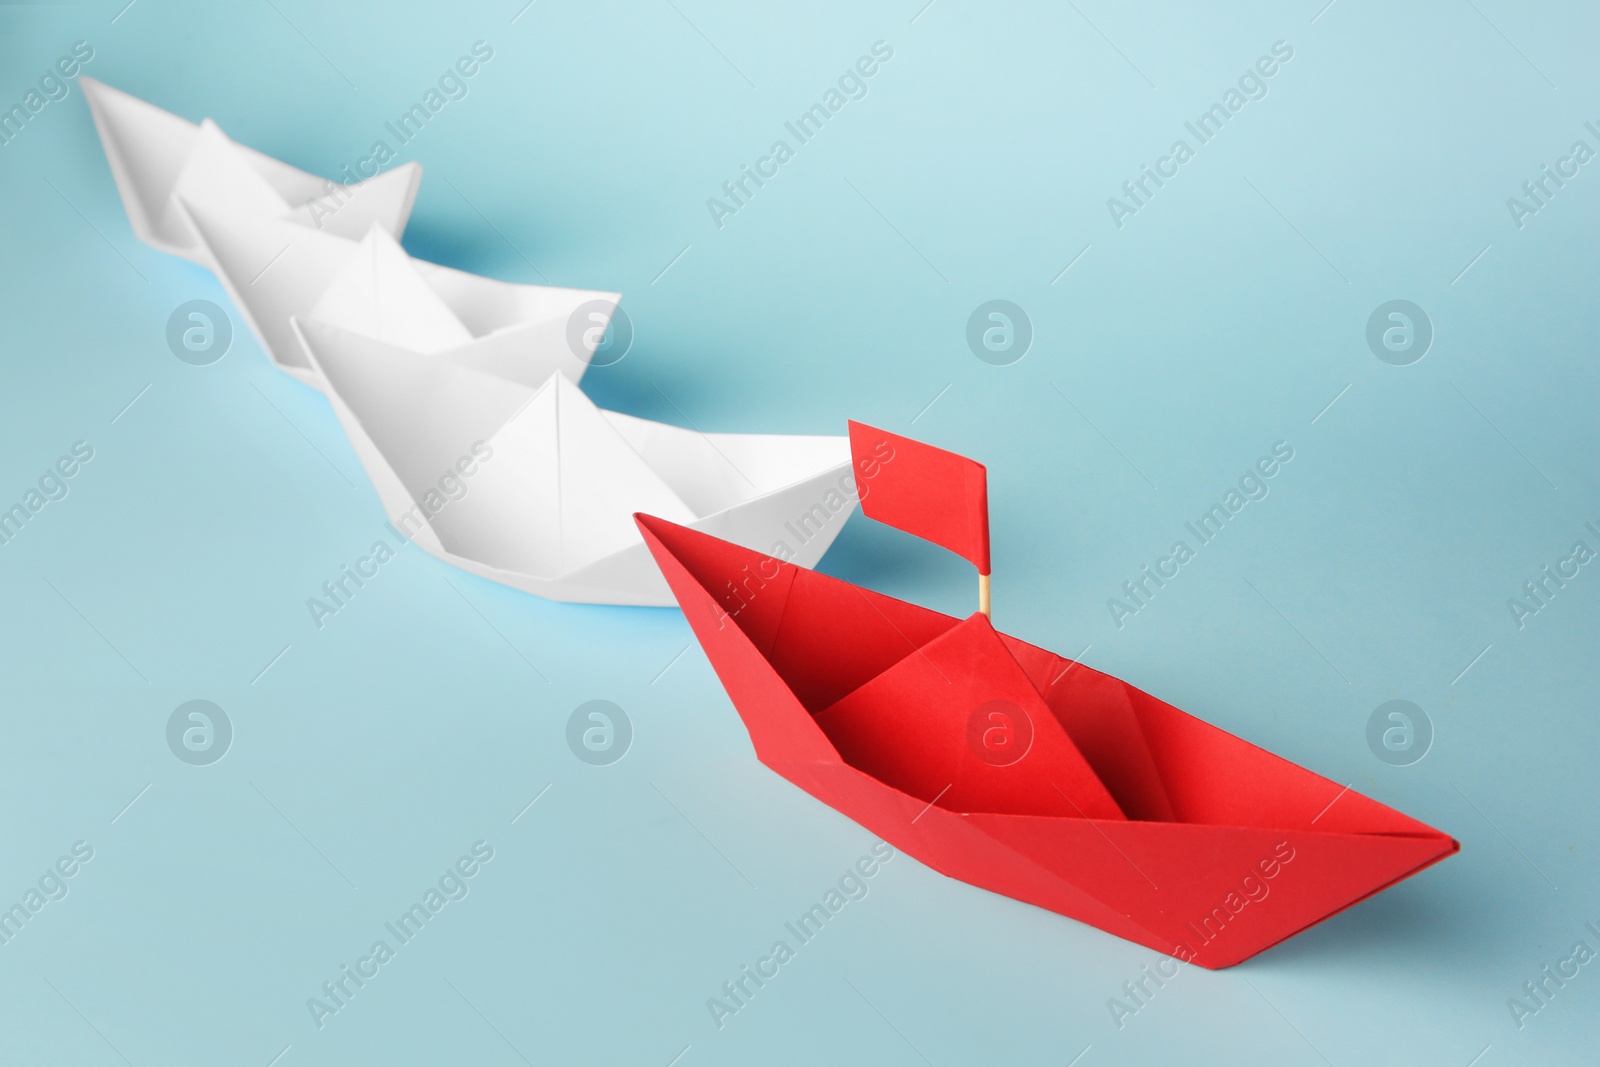 Photo of Group of paper boats following red one on light blue background. Leadership concept